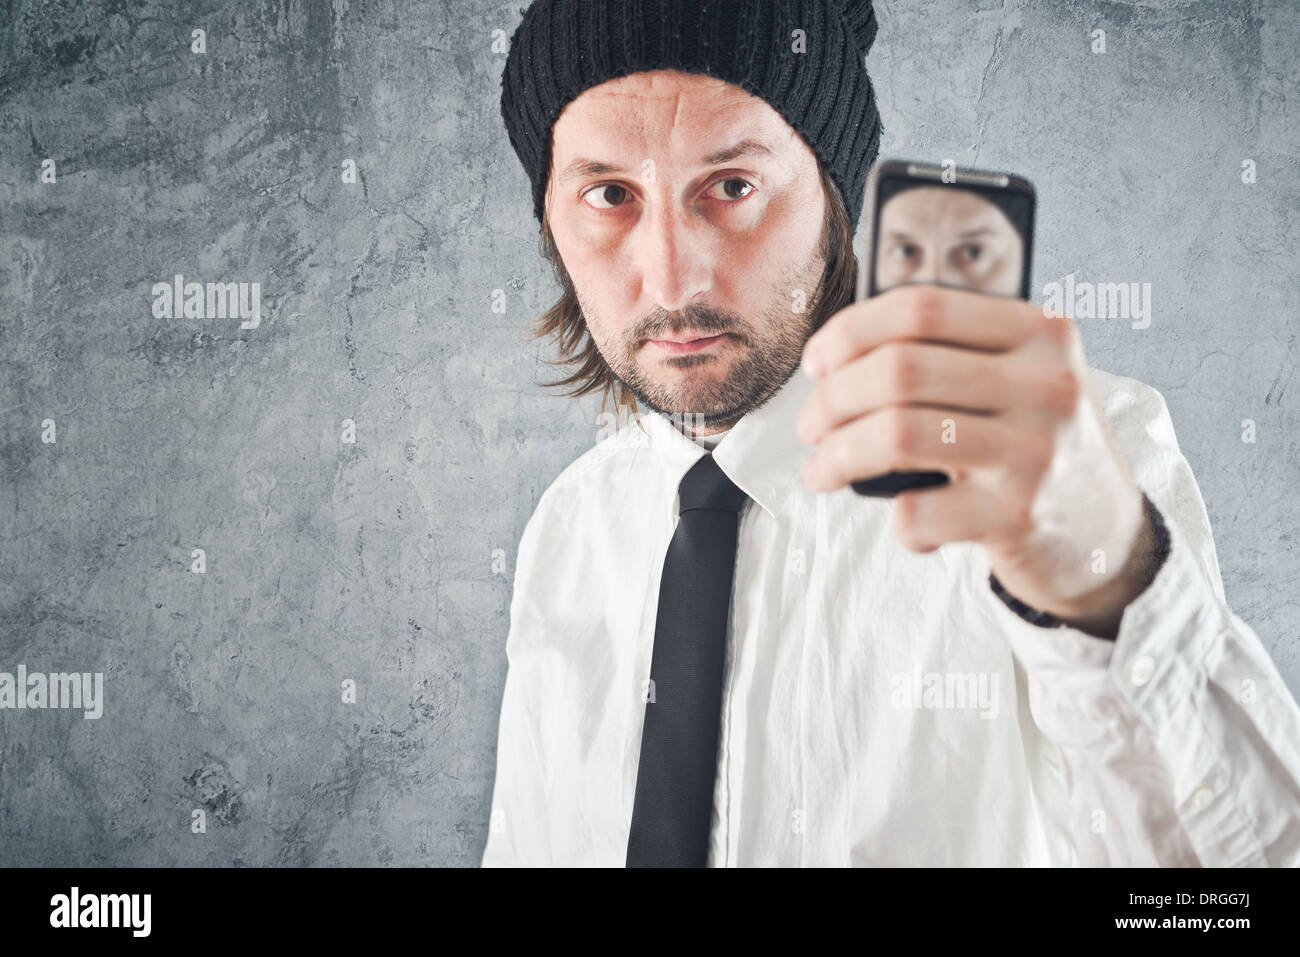 Businessman taking self or selfie portrait with mobile phone Stock Photo